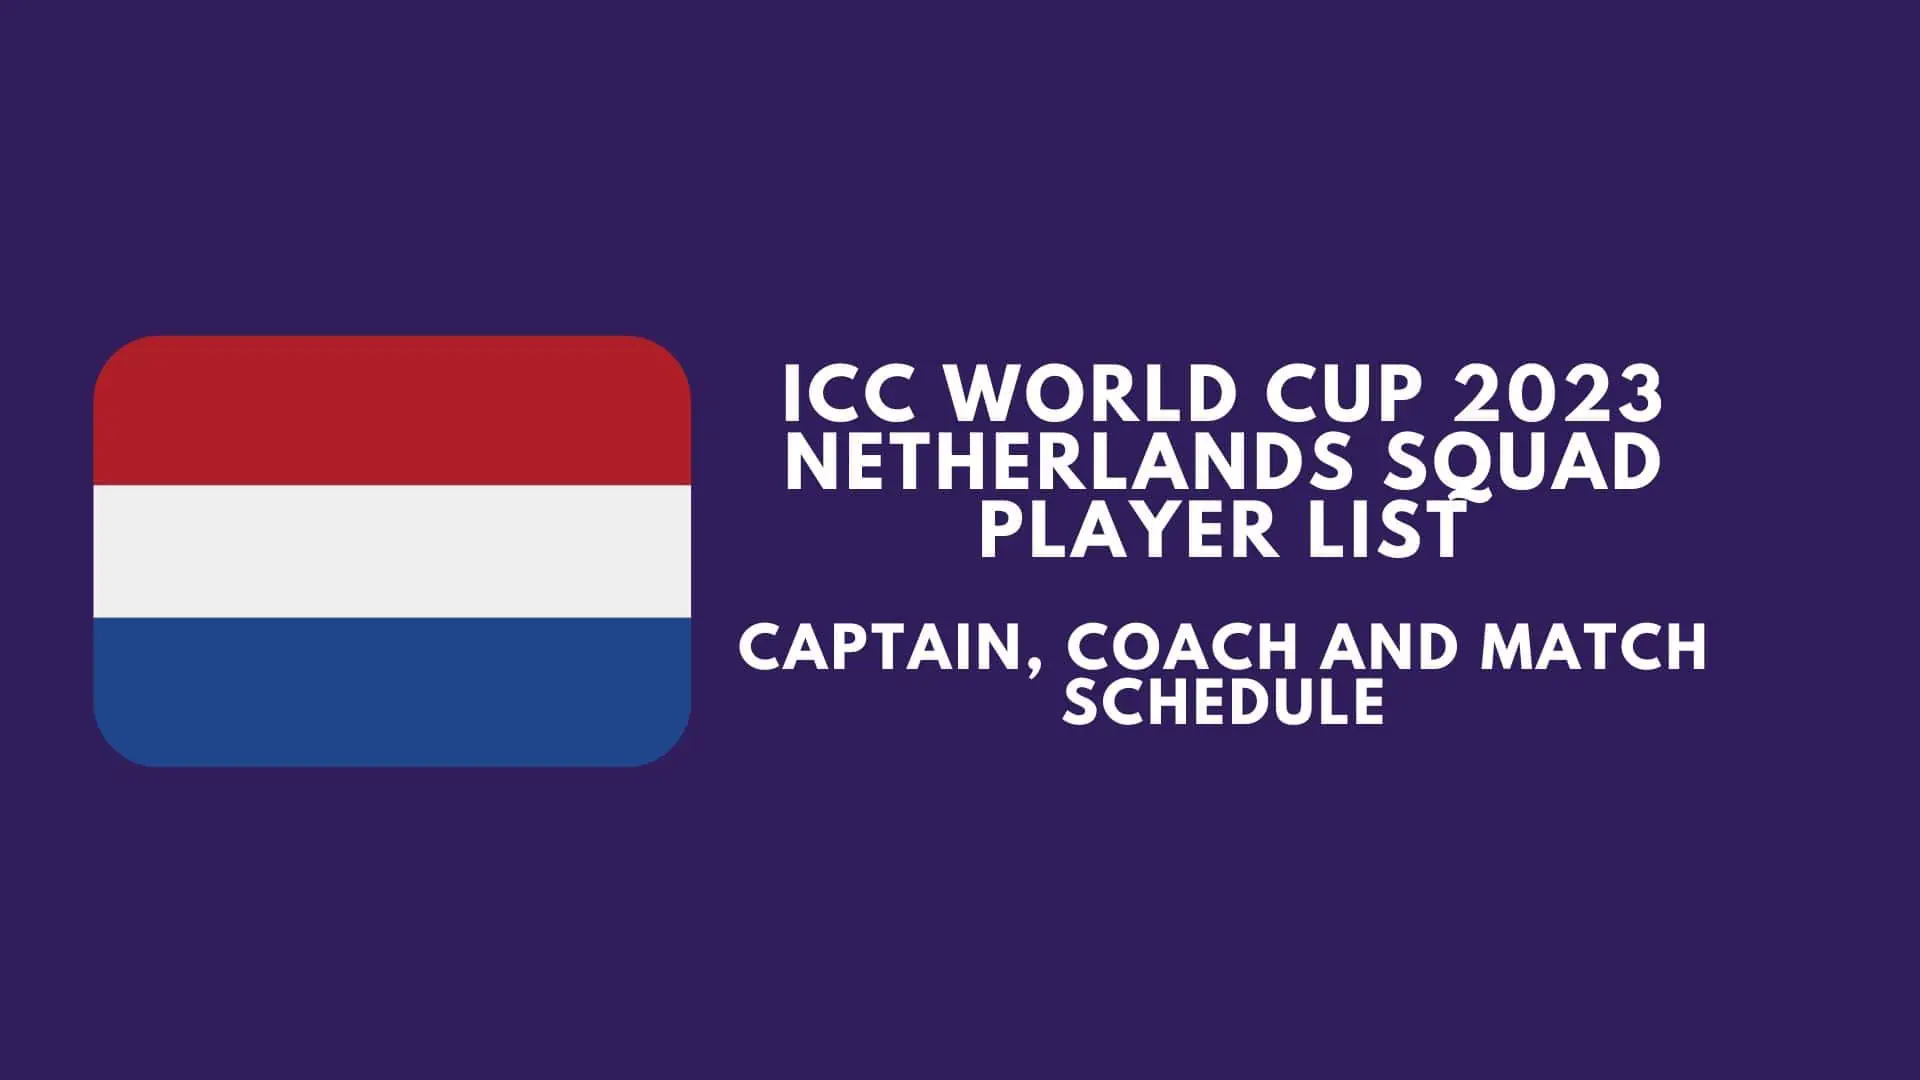 ICC World Cup 2023 Netherlands Squad Player List, Captain, Coach and Match Schedule